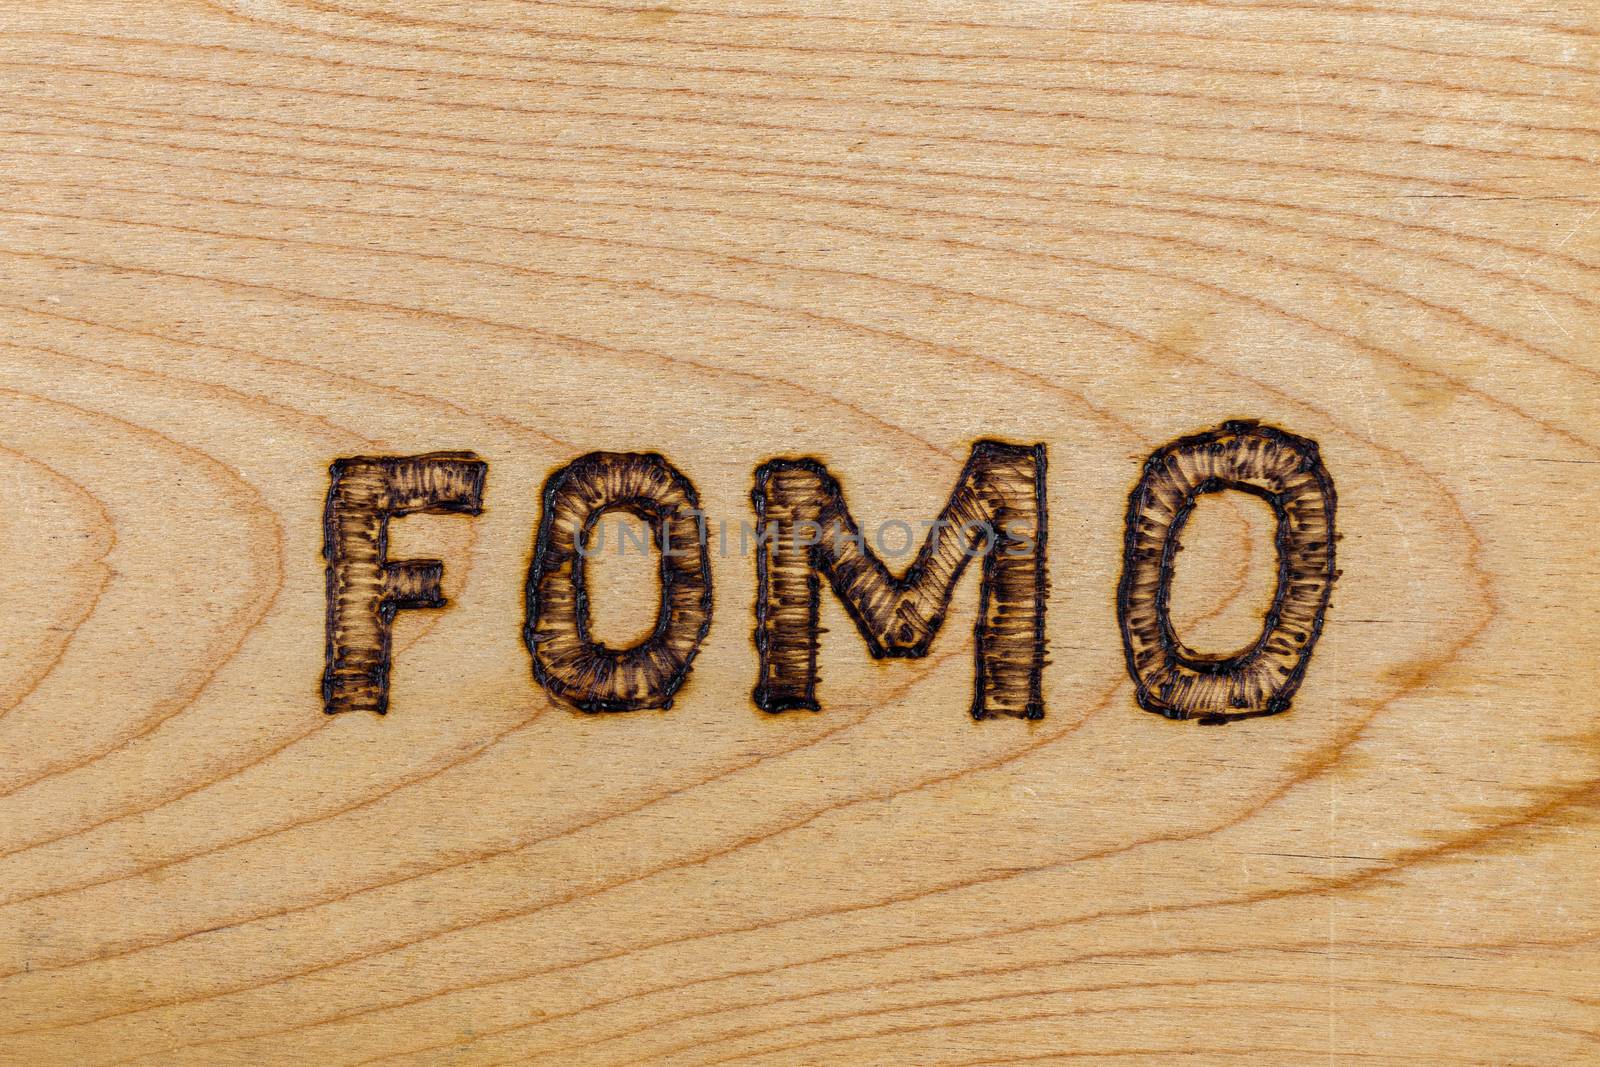 abbreviation FOMO - fear of missing out - burnt by hand on flat wooden surface by z1b